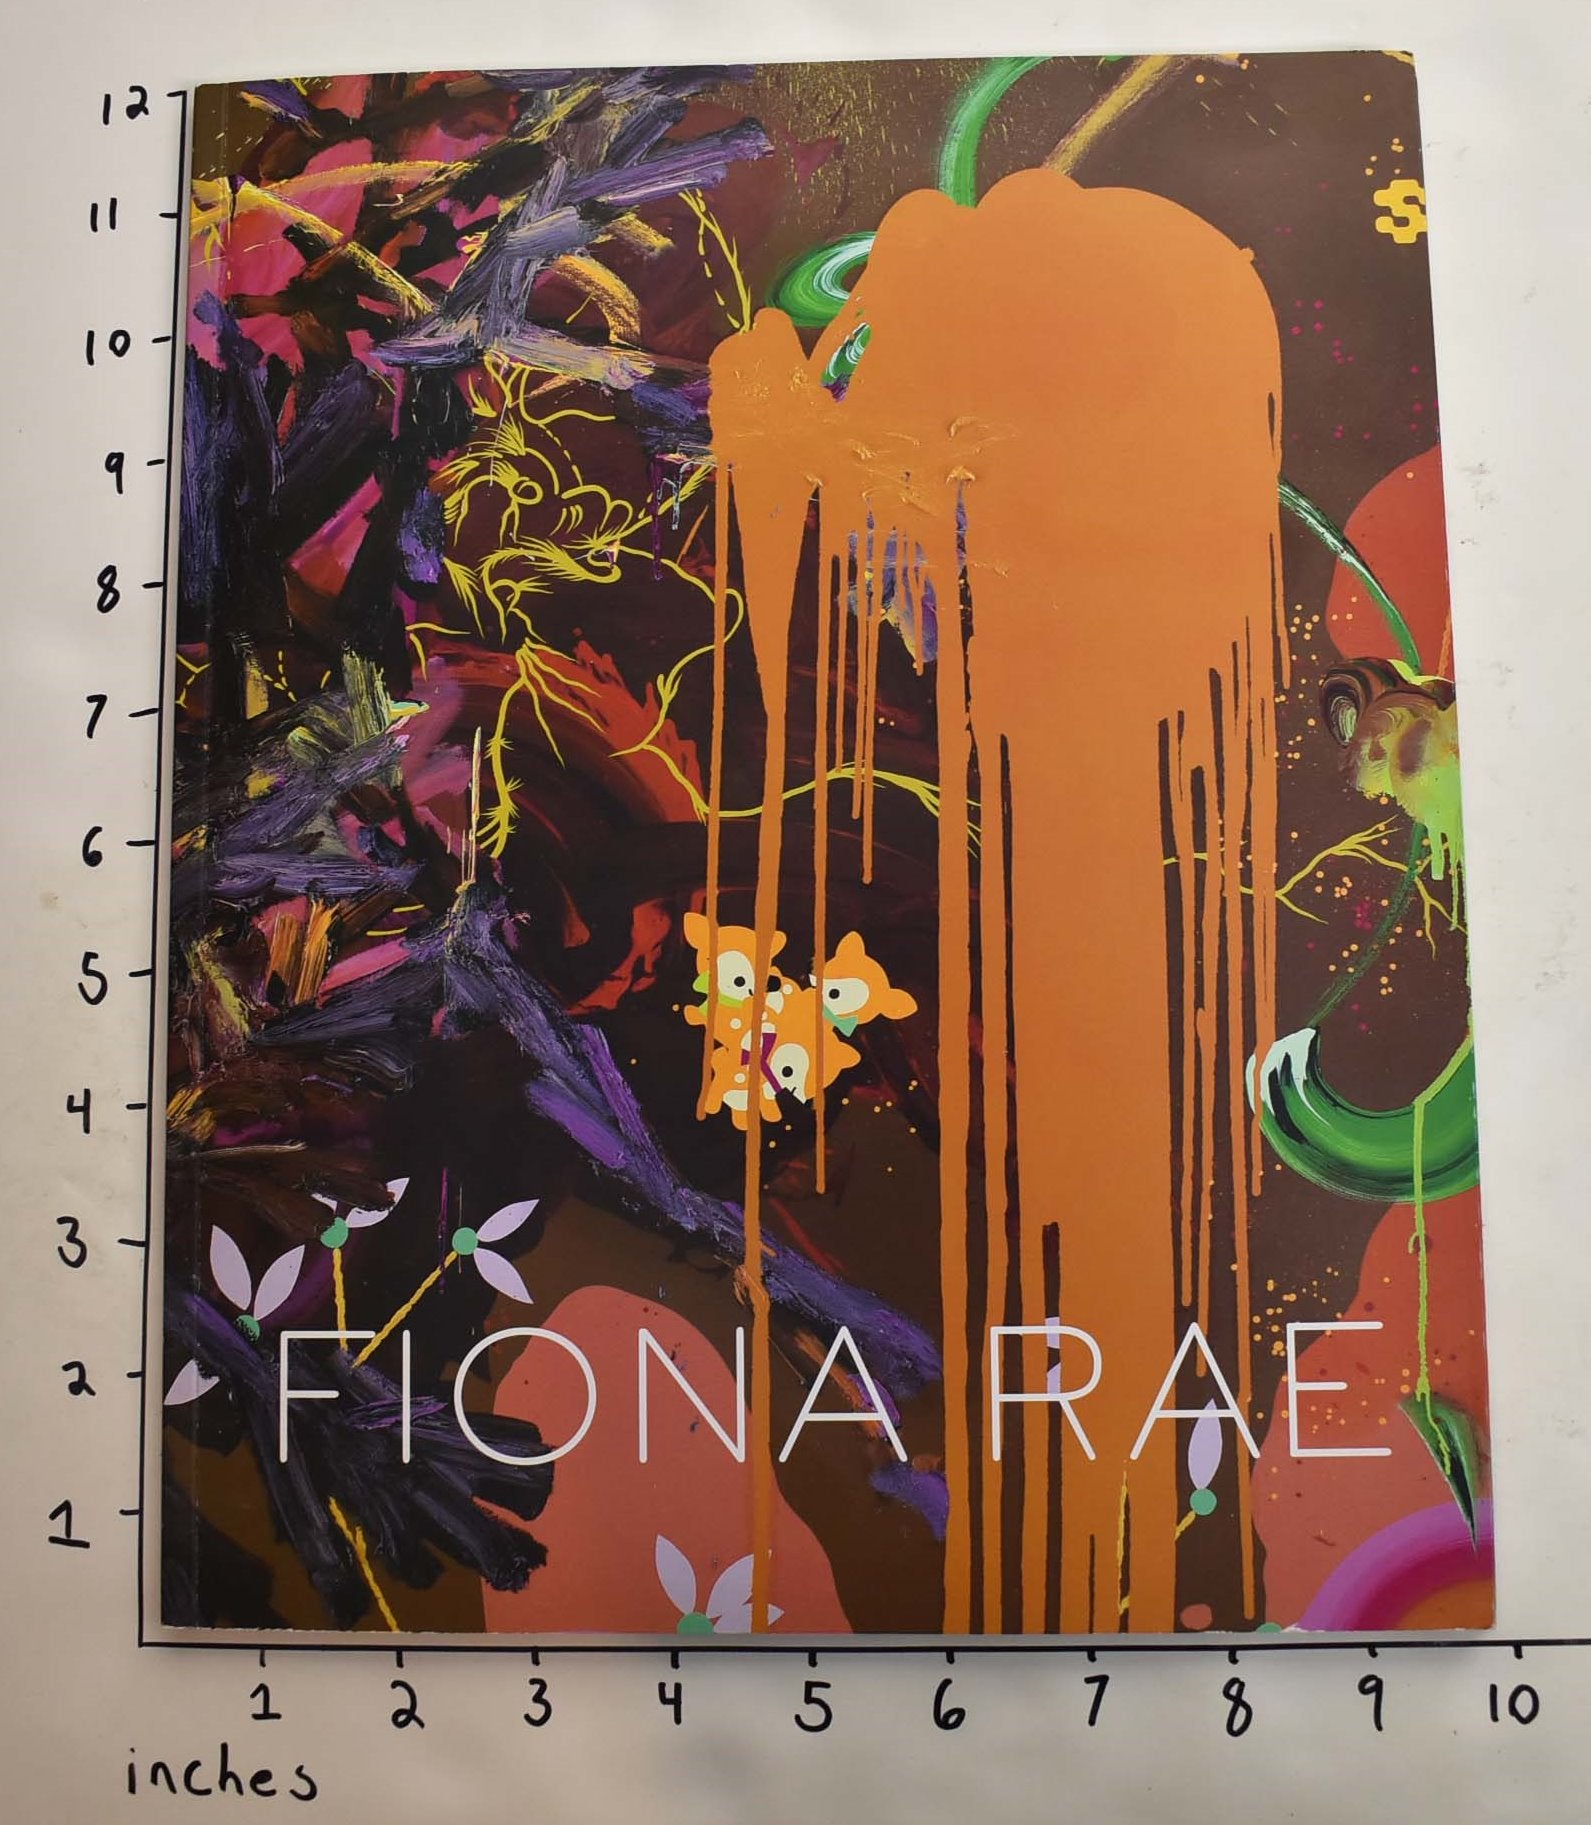 Fiona Rae: You Are The Young and The Hopeless